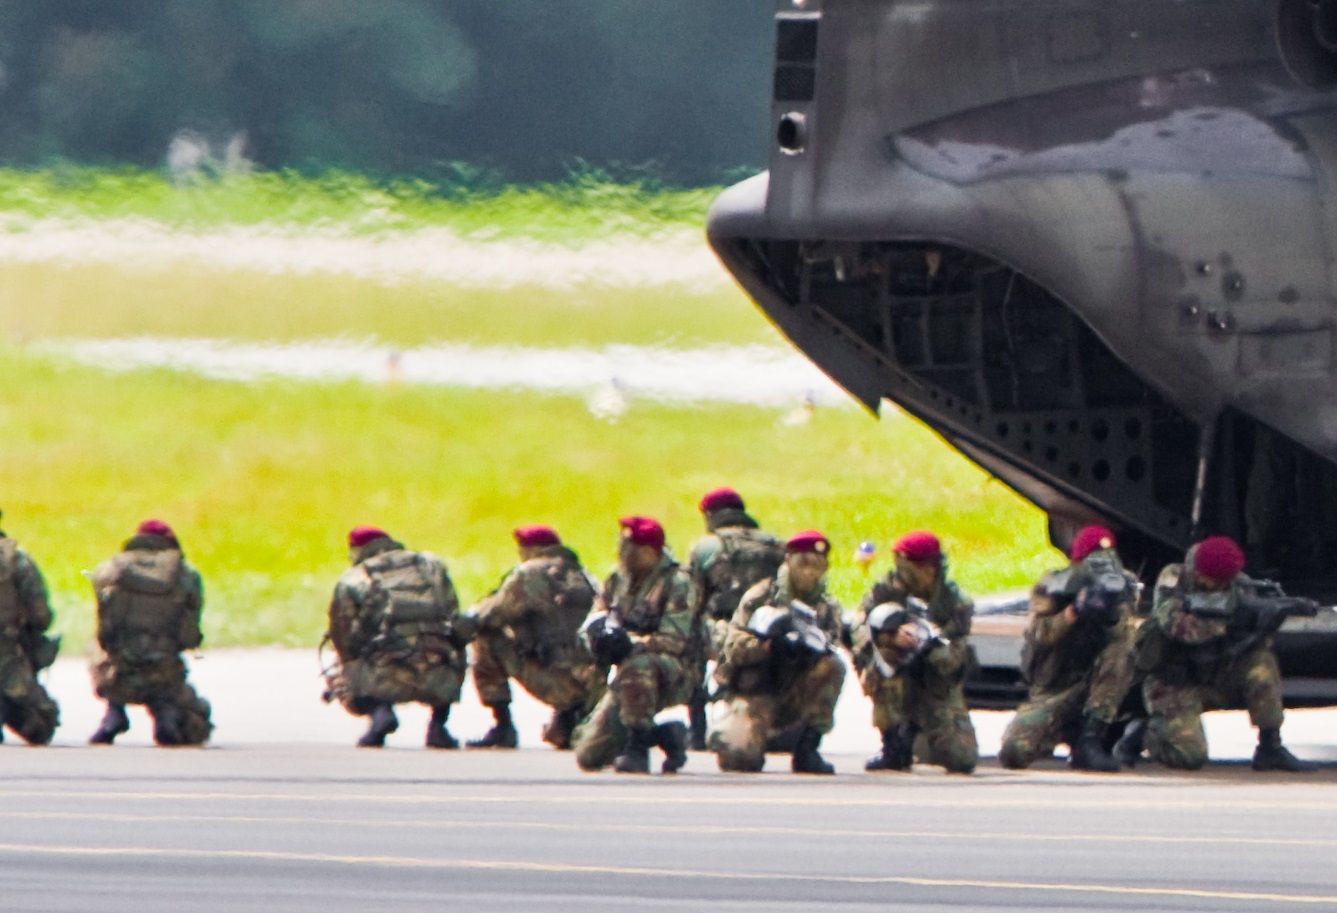 Several members of the Singapore special forces on an airfield.